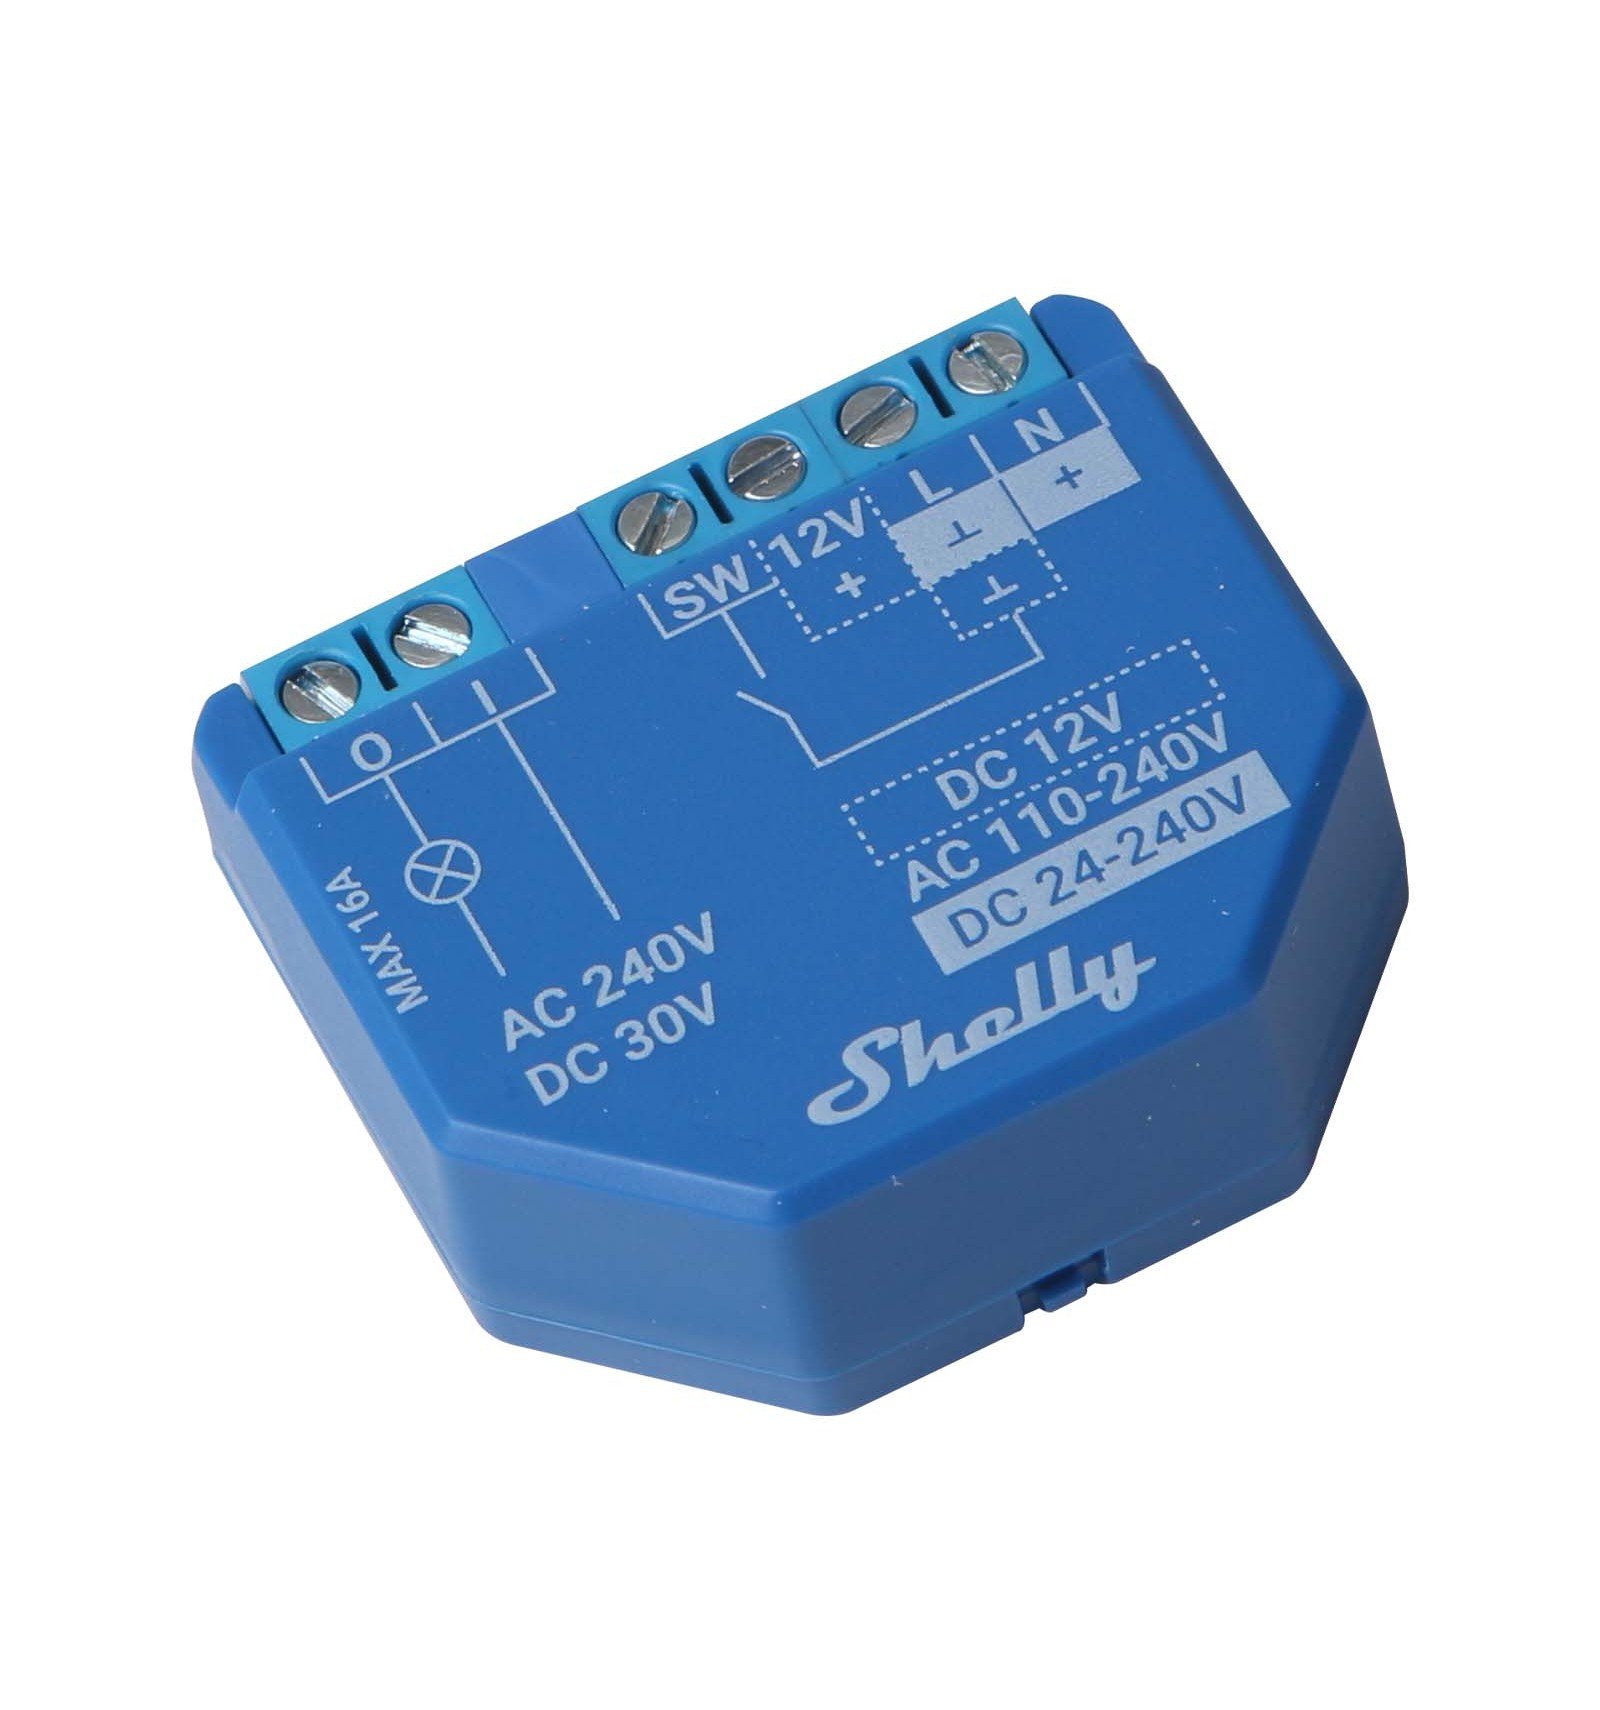 Shelly Plus 1 Smart Home Switch WiFi Bluetooth Operated Relay